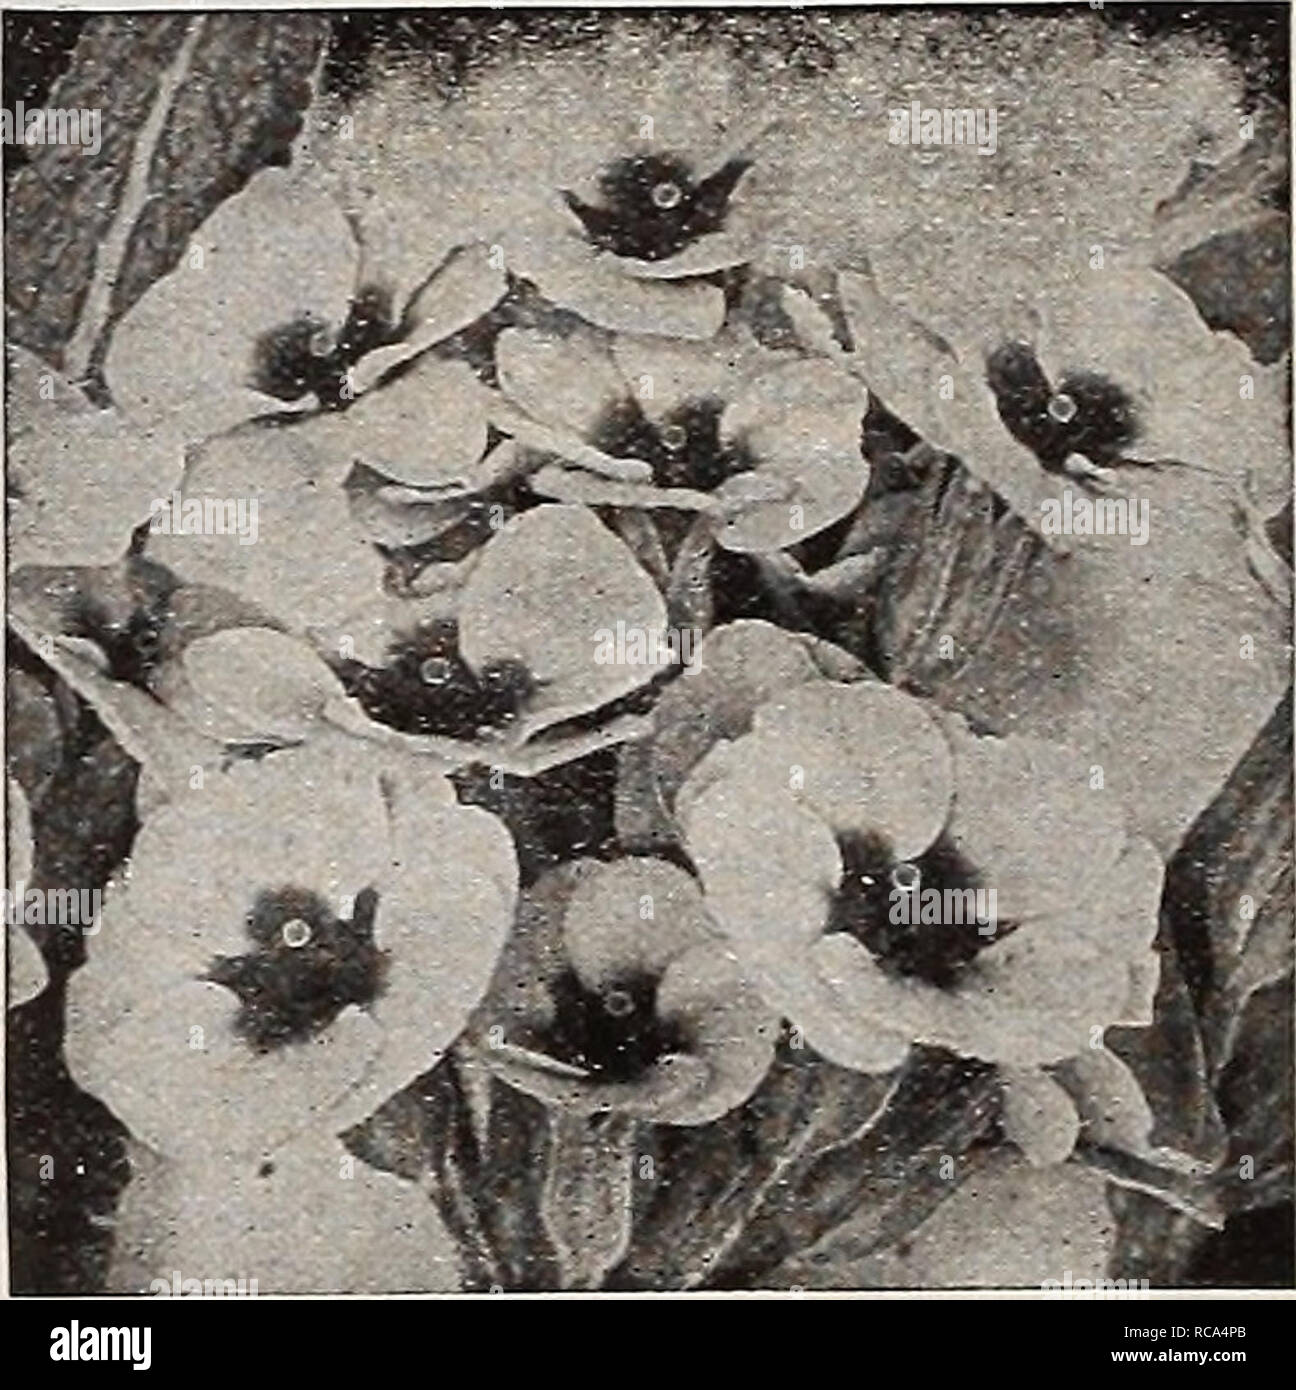 . Dreer's garden book 1918. Seeds Catalogs; Nursery stock Catalogs; Gardening Equipment and supplies Catalogs; Flowers Seeds Catalogs; Vegetables Seeds Catalogs; Fruit Seeds Catalogs. Japanese Primroses POTENTILLA (Cinquifoii) Charming plants for the border, with brilliant single or double flowers that are produced in profusion from June to August; succeeds in any soil; 18 inches. Atrosanguinea. Rich crimson, single. Pyrenaica. Single, golden-yellow. Vulcan. Double, rich crimson. William Rollison. Bright vermilion; double. 25 cts. each; $2.50 per doz. Set of 4 sorts for 85 cts. Primula Vulgari Stock Photo